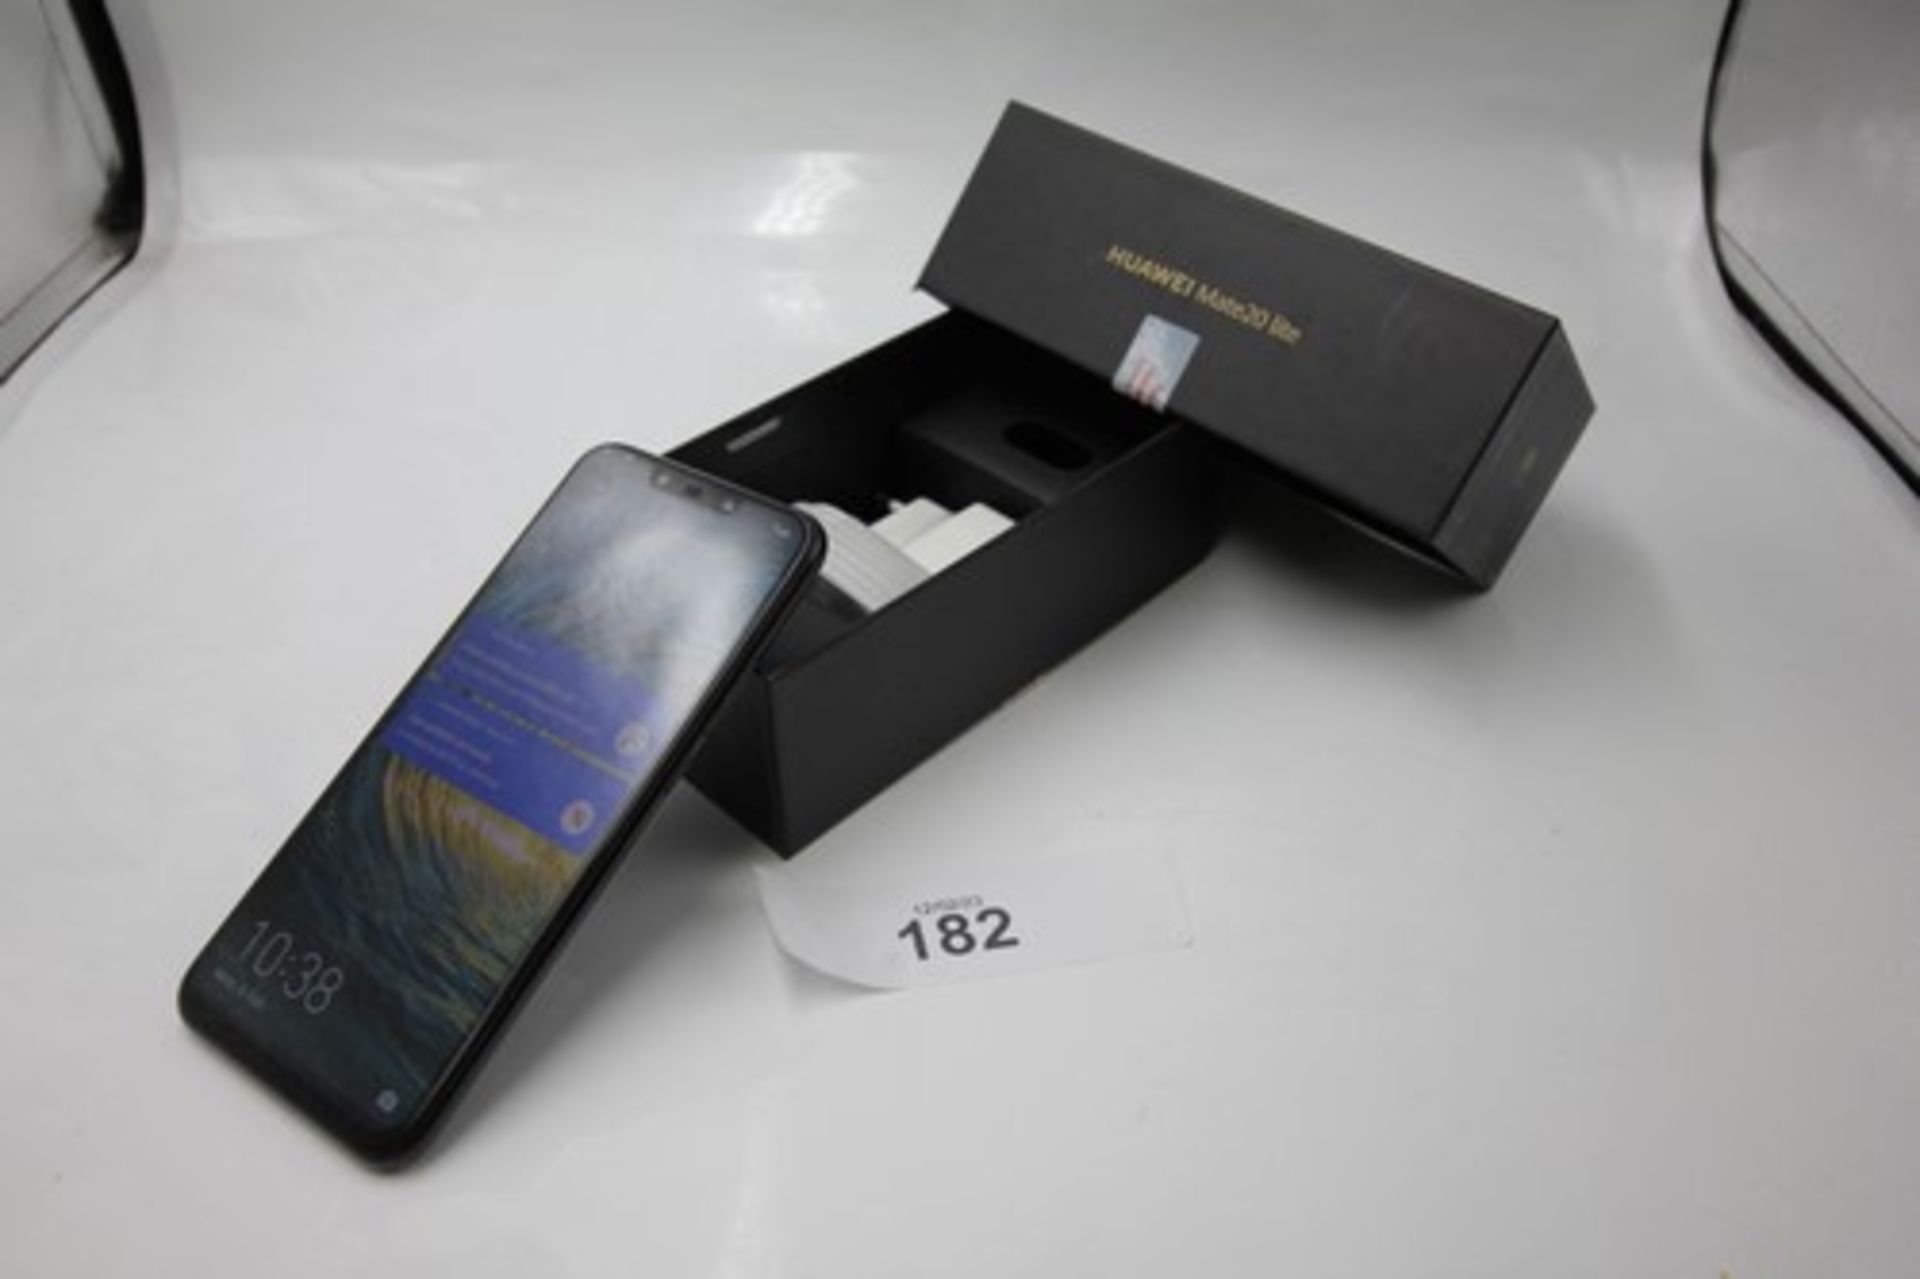 1 x Huawei Mate 20 Lite smart phone - Sealed new in box These items have not been tested or